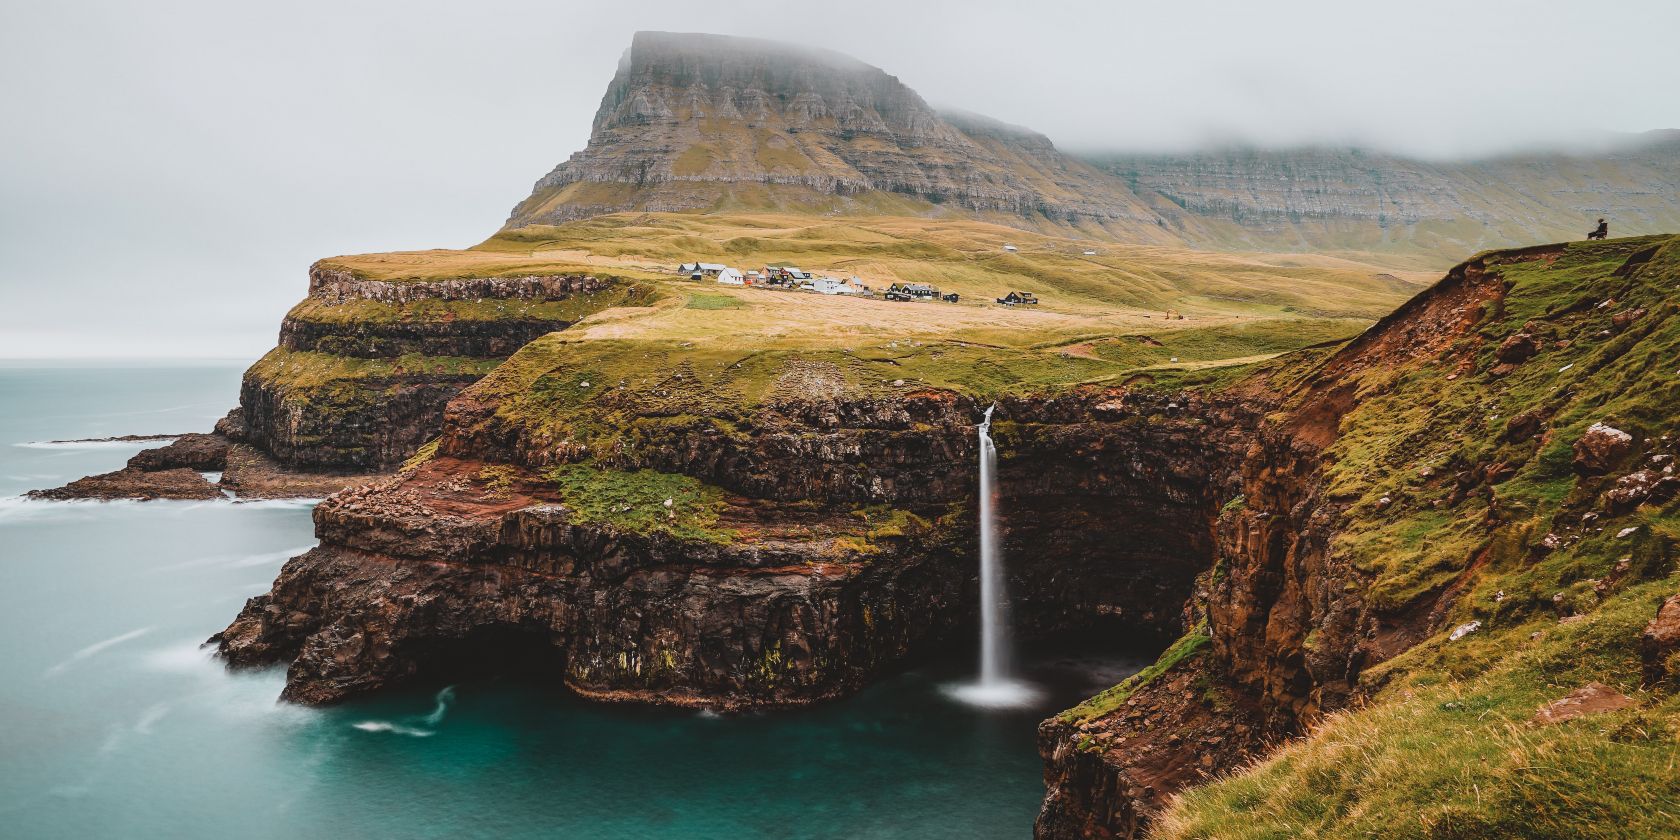 A landscape in the Faroe Islands, featuring a waterfall, cliffs and a mountain